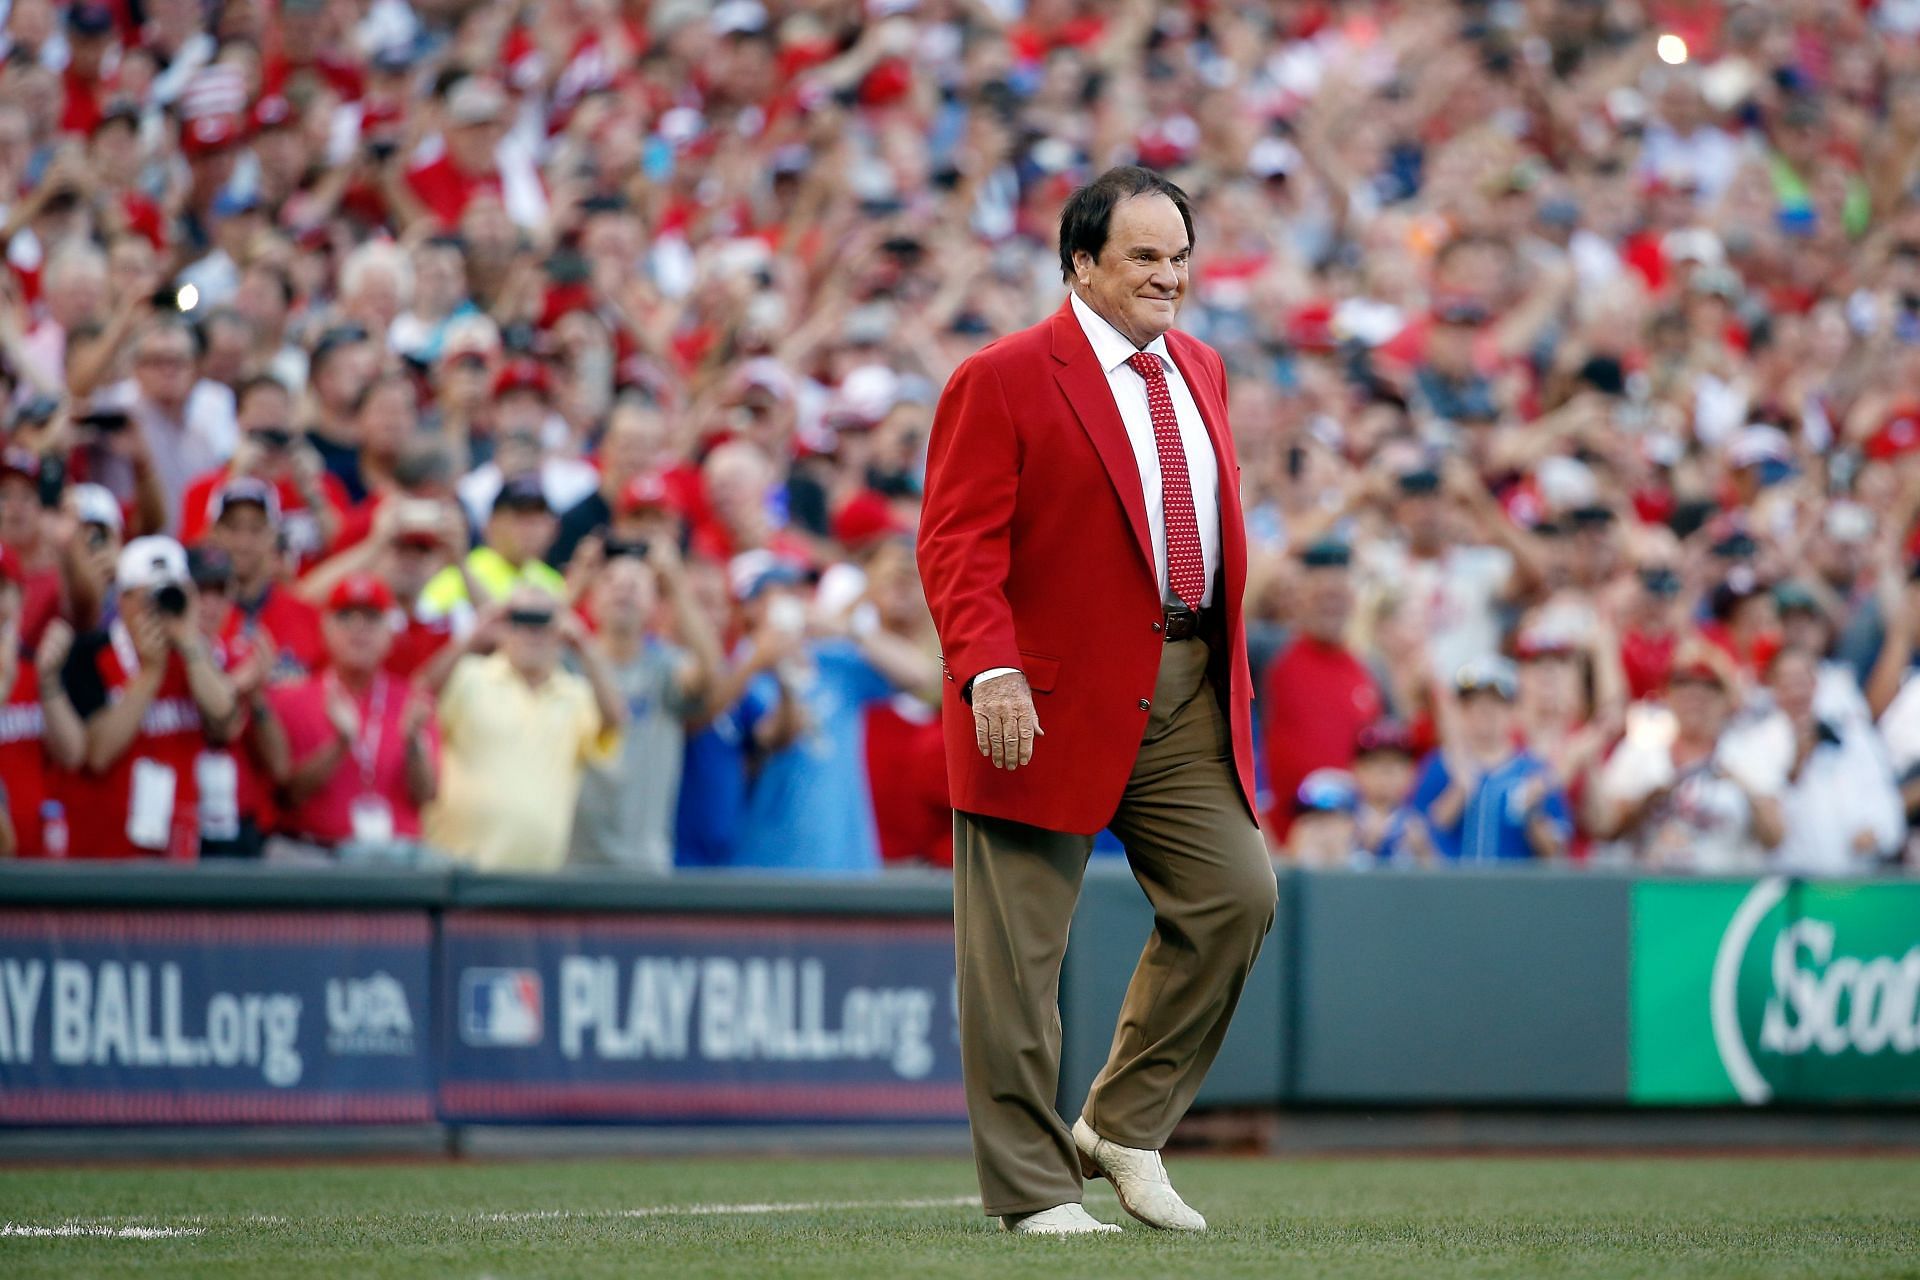 Pete Rose makes shocking pick for 2023 World Series in first legal sports  bet in Ohio: “I don't know a damn thing about odds. Go Reds!